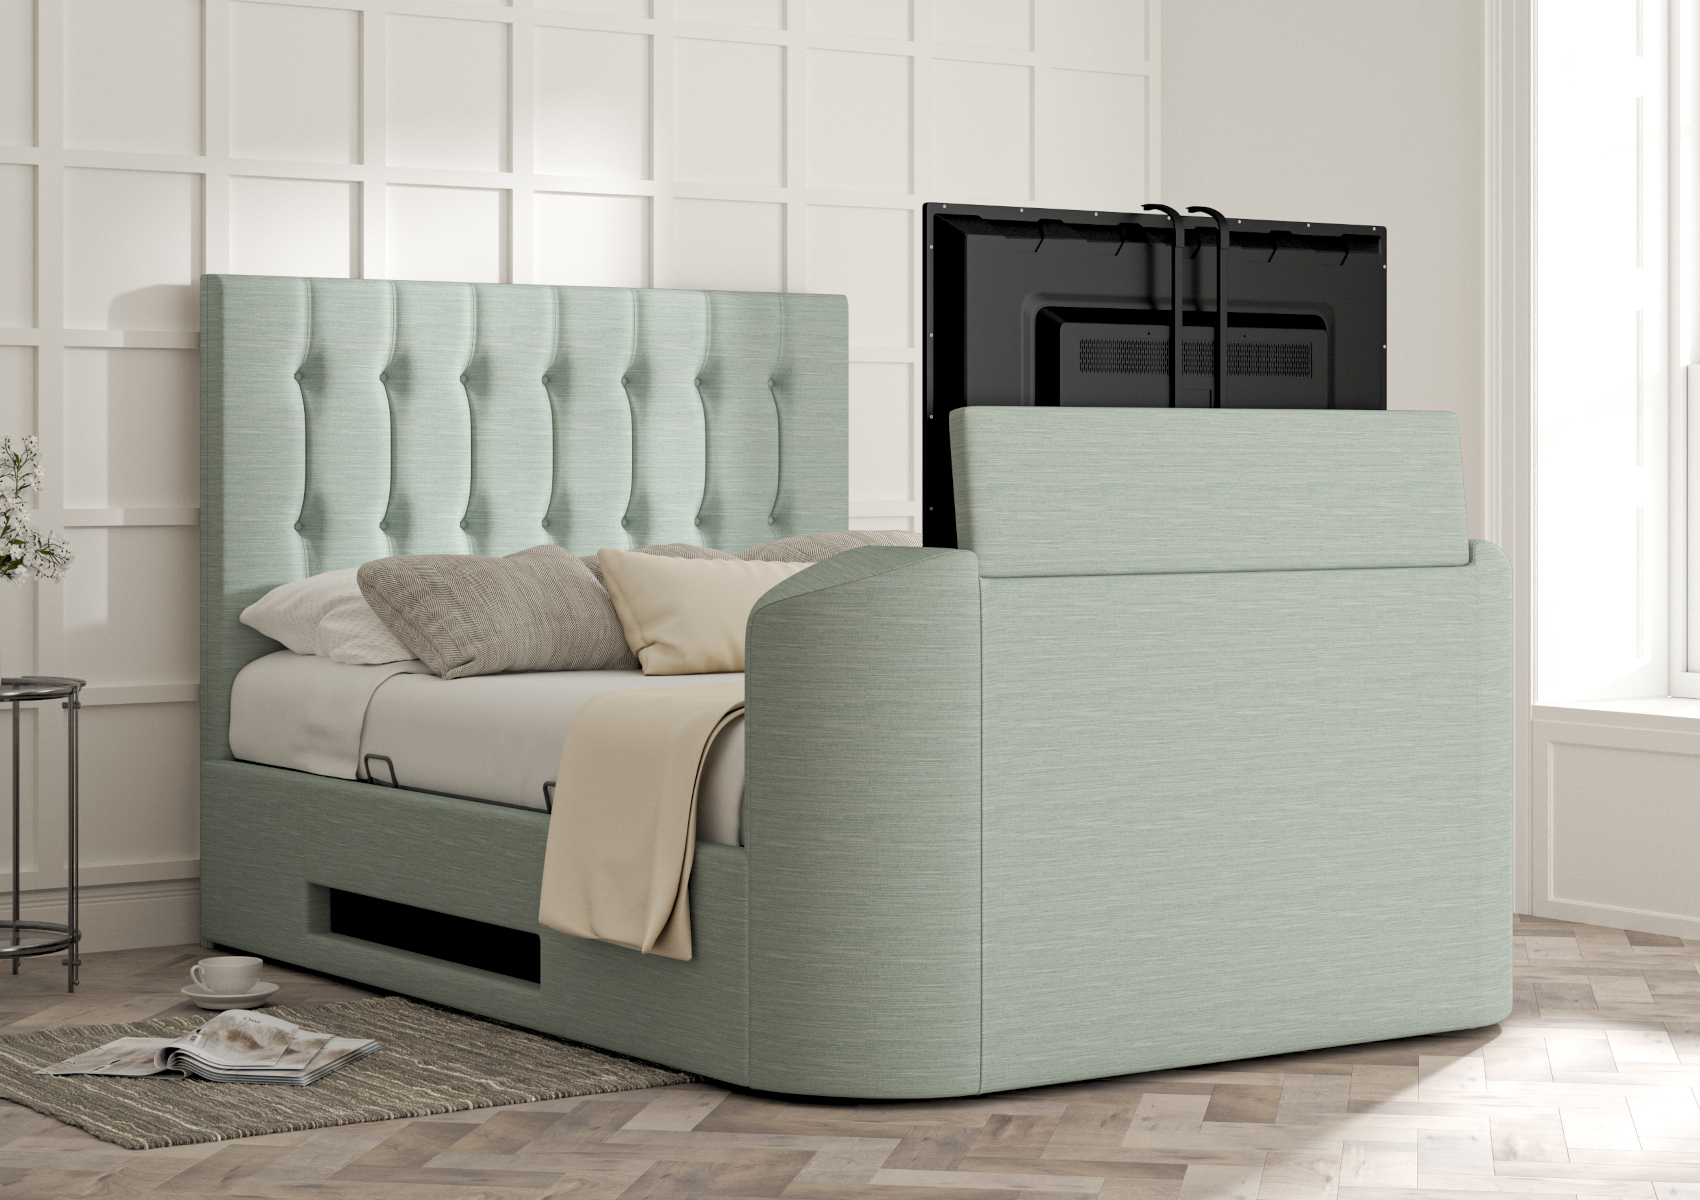 View Dorchester Linea SeaBlue Upholstered Double Multifunctional Ottoman Smart TV Bed Time4Sleep information